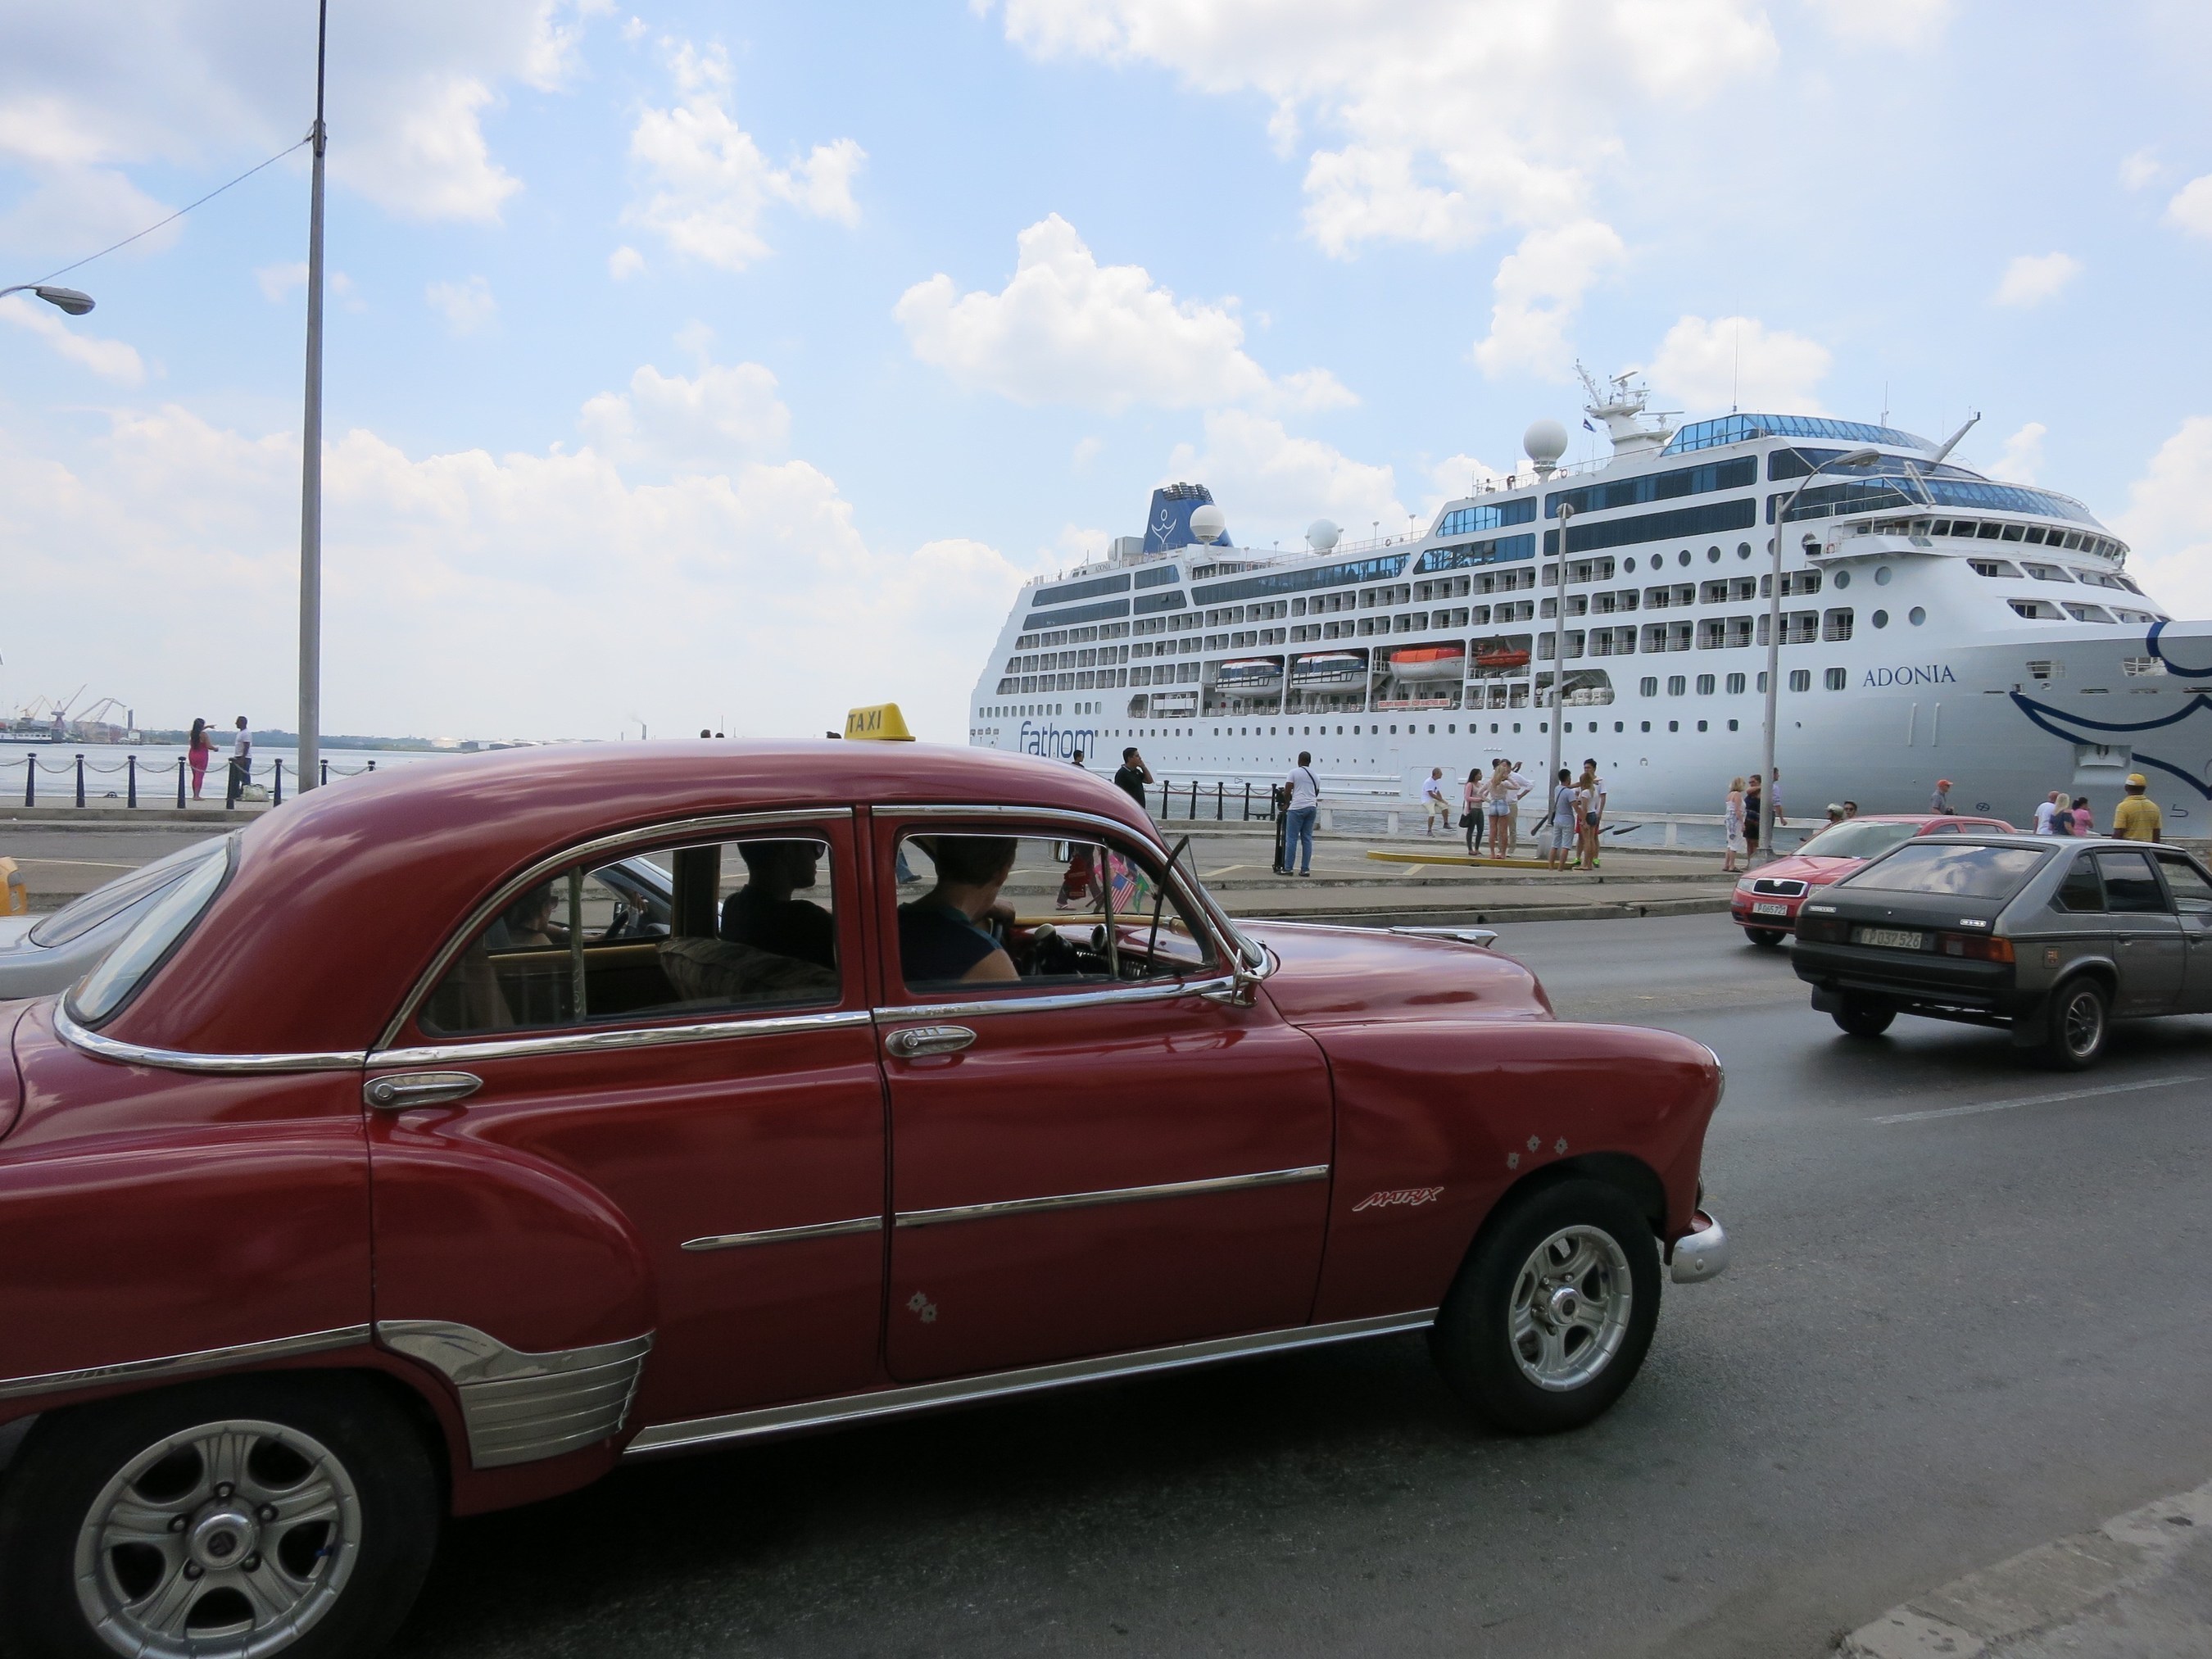 A classic American car serving as a taxi in Havana drives past Carnival Corporation's Fathom Adonia cruise ship -- which on May 2 became the first U.S. cruise ship in over 50 years to sail from the U.S. to Cuba.